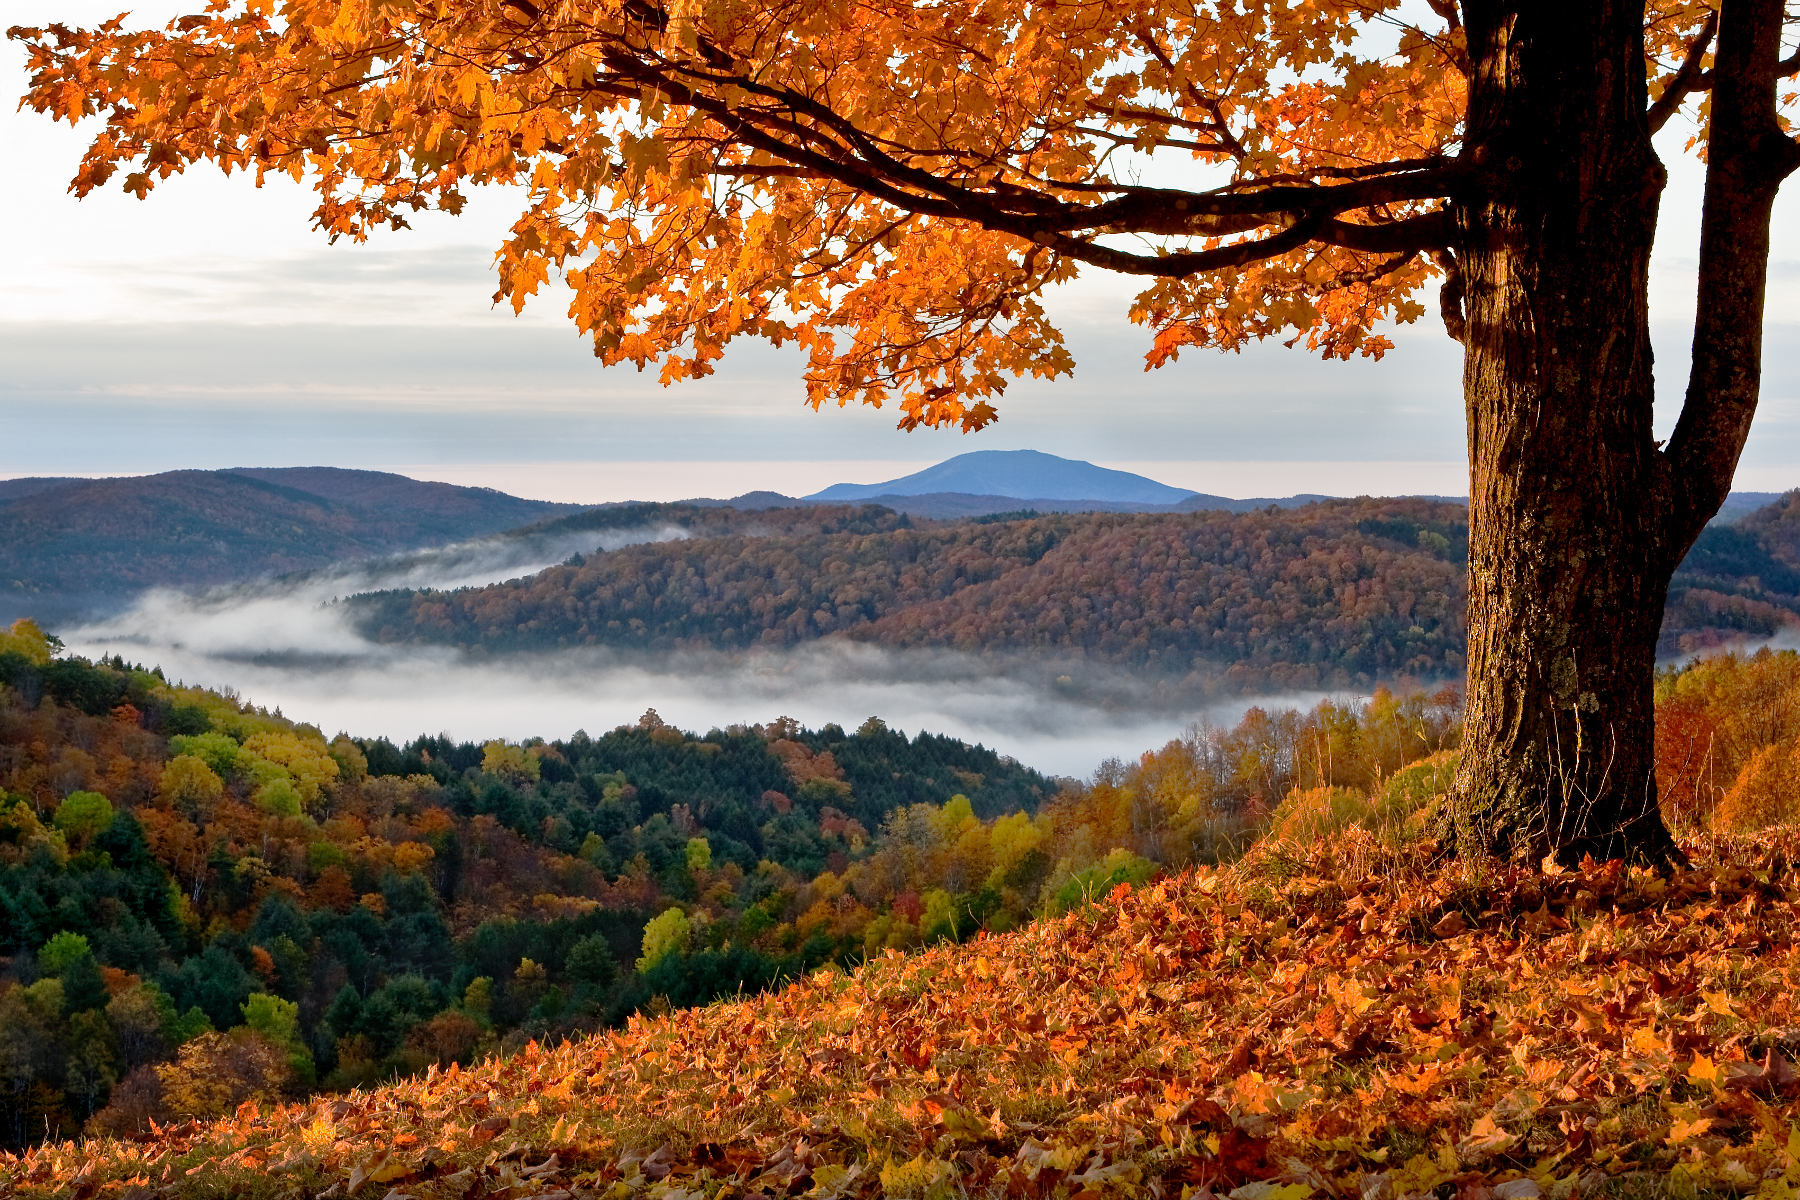 Spectacular fall foliage is expected in New England this year